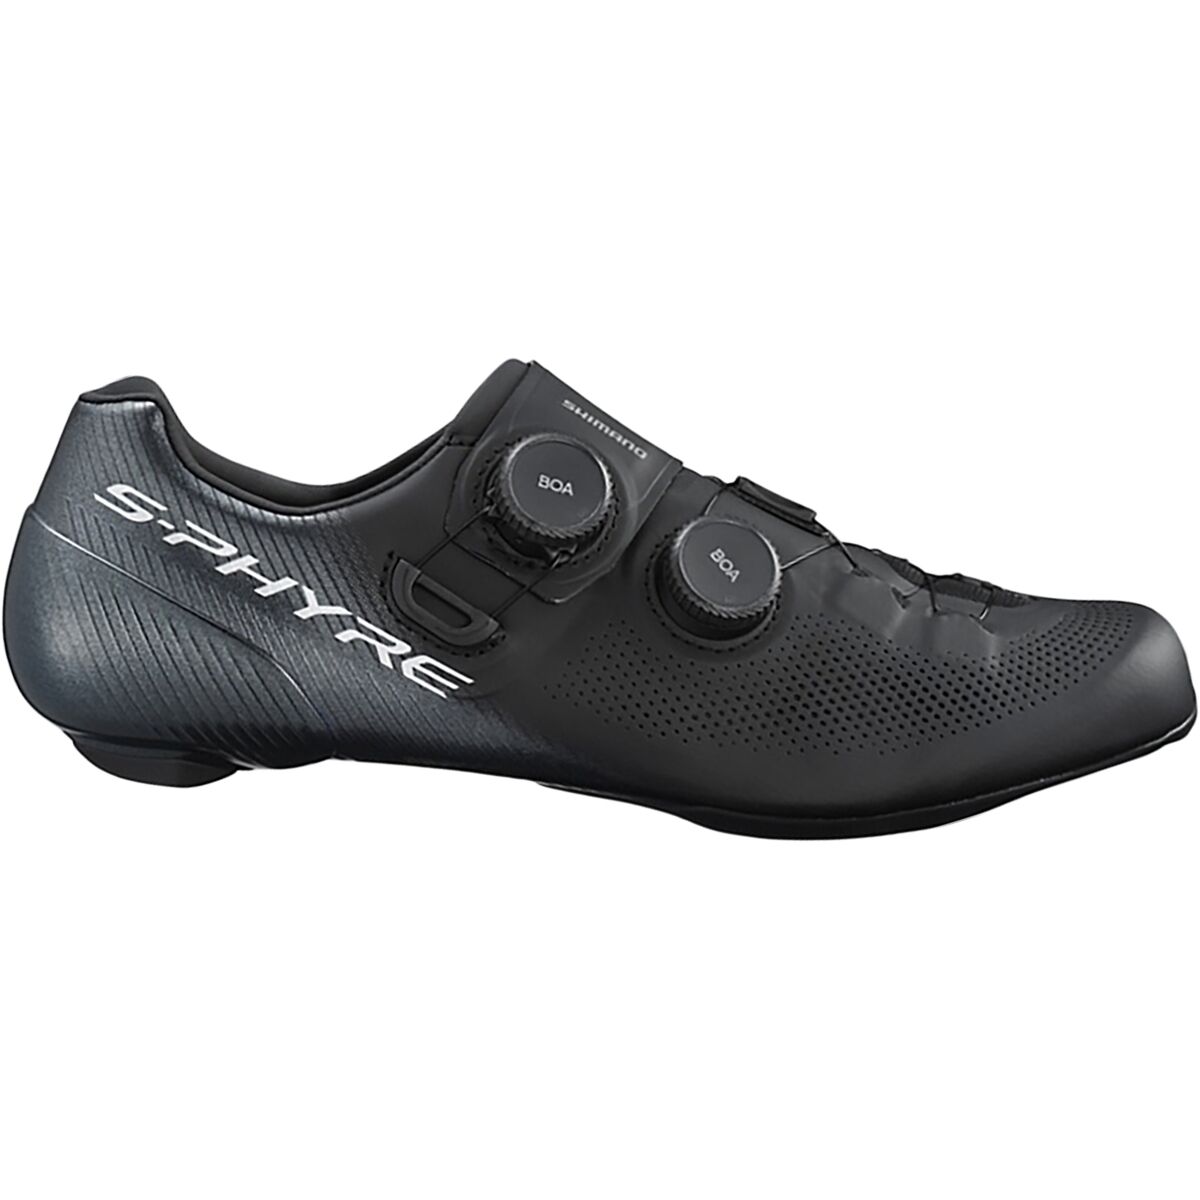 Shimano RC903 S-PHYRE Cycling Shoes - Men's